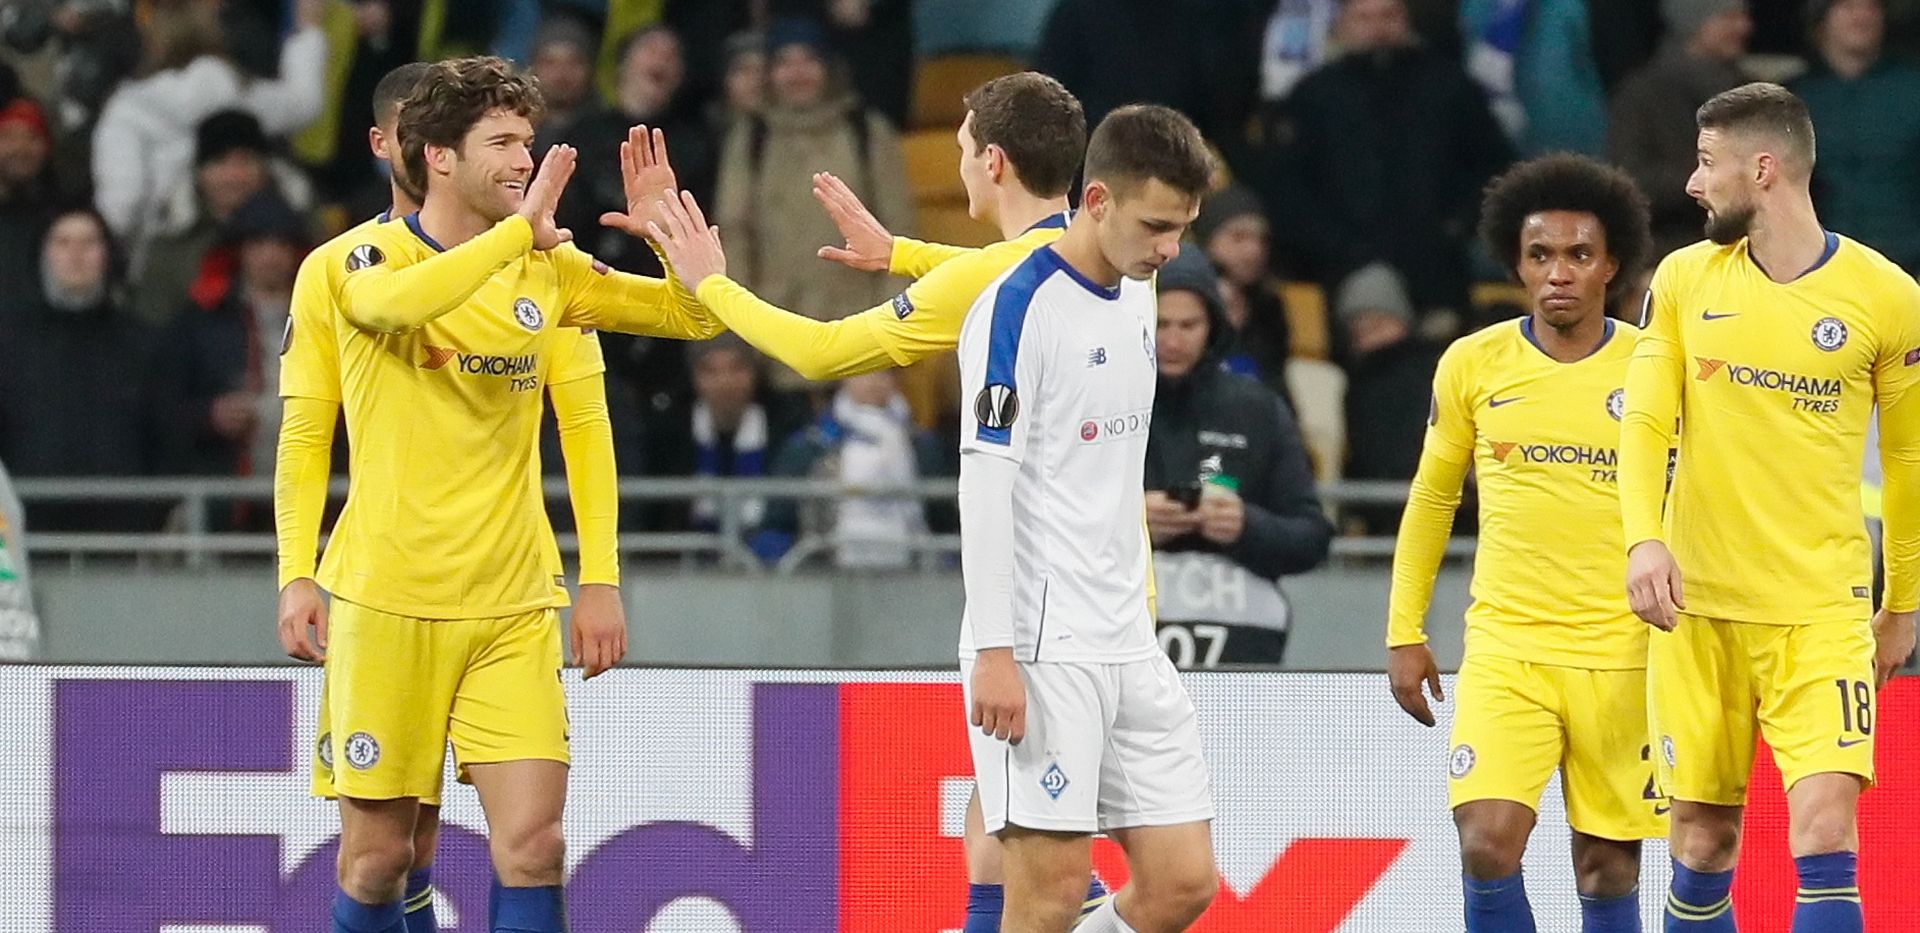 epa07437308 Marcos Alonso (L) of Chelsea celebrates his goal together with teammates during the UEFA Europa League Round of 16, second leg soccer match between FC Dynamo Kyiv and Chelsea FC in Kiev, Ukraine, 14 March 2019.  EPA/SERGEY DOLZHENKO